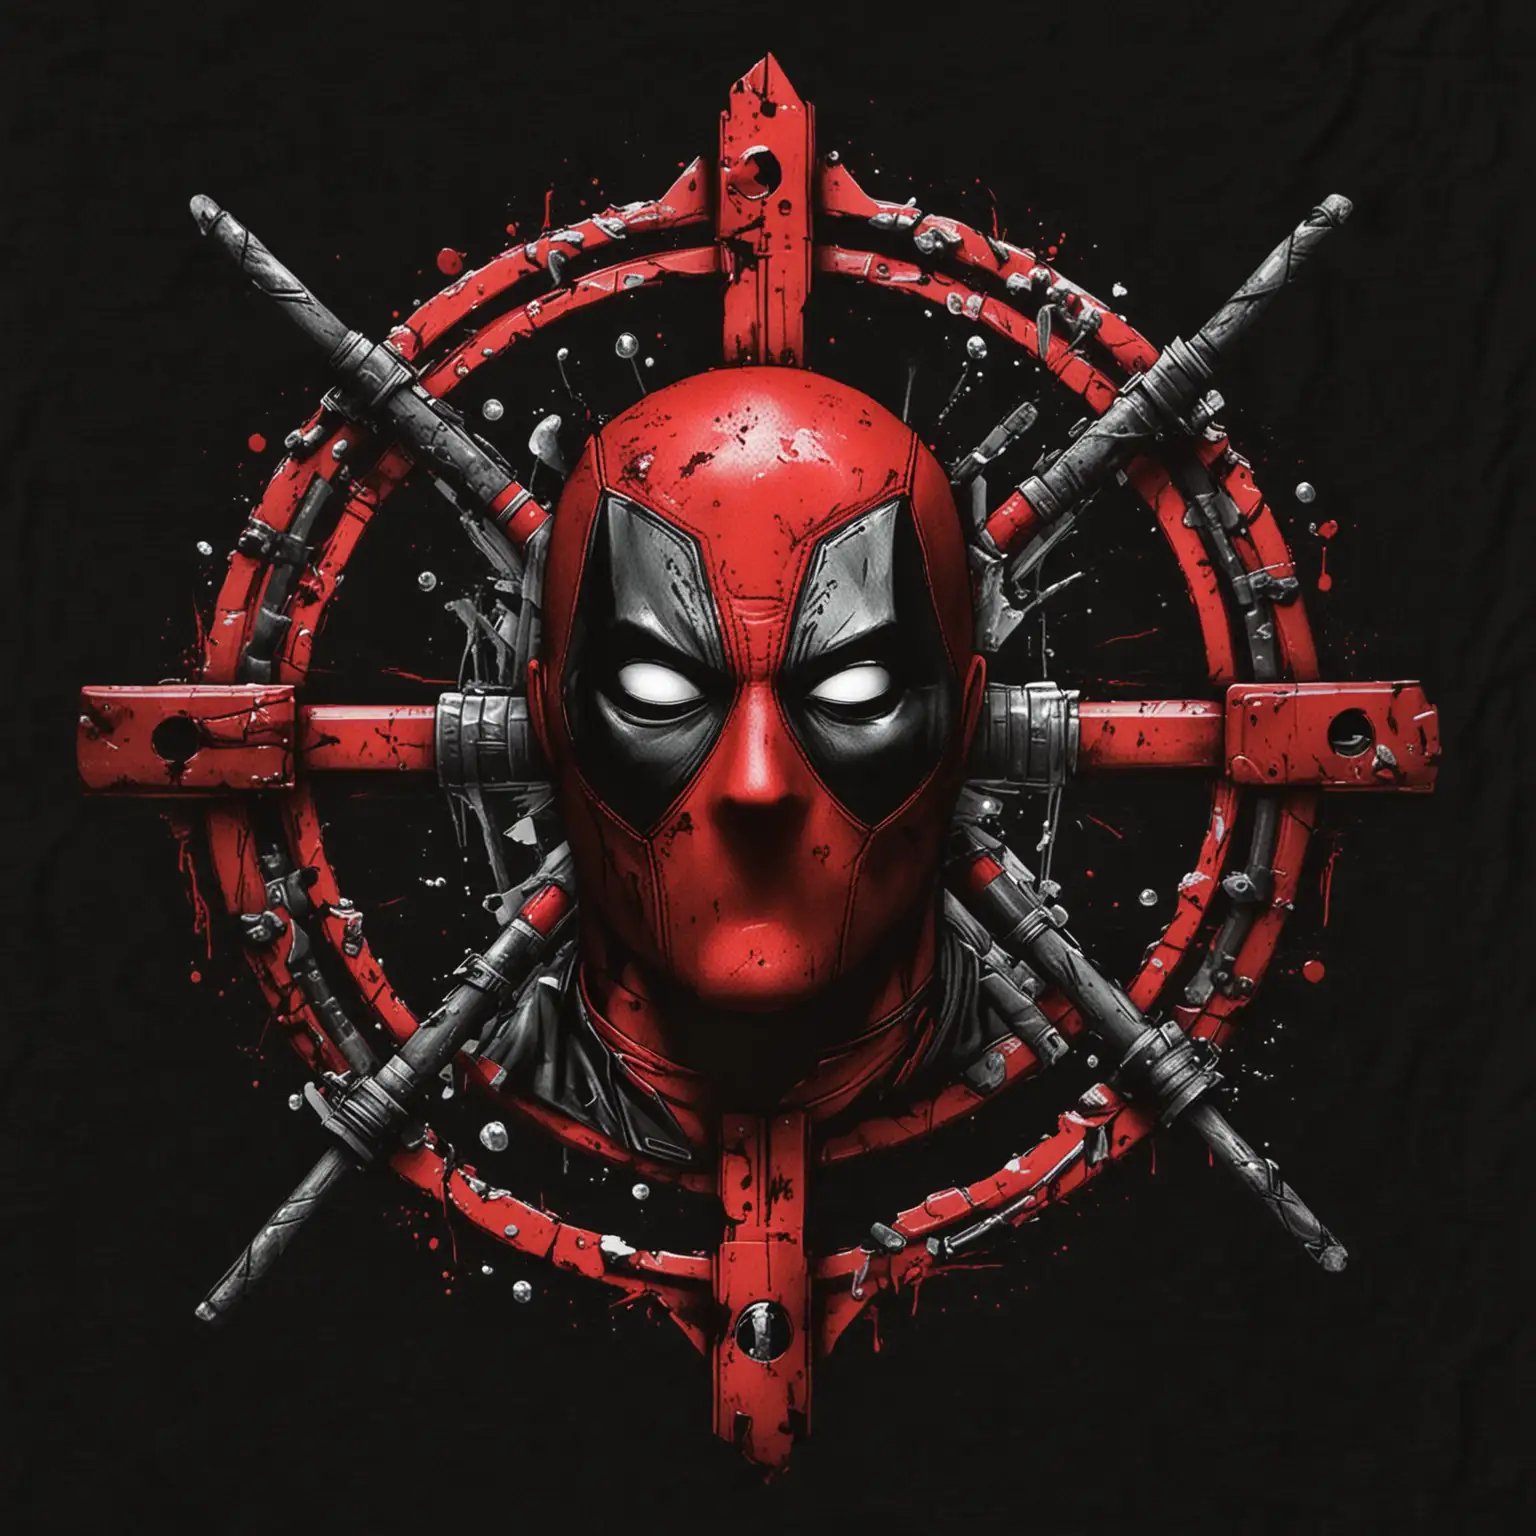 Tee shirt front logo, Deadpool's head between double red crosshairs, include two pool sticks in X pattern, black background